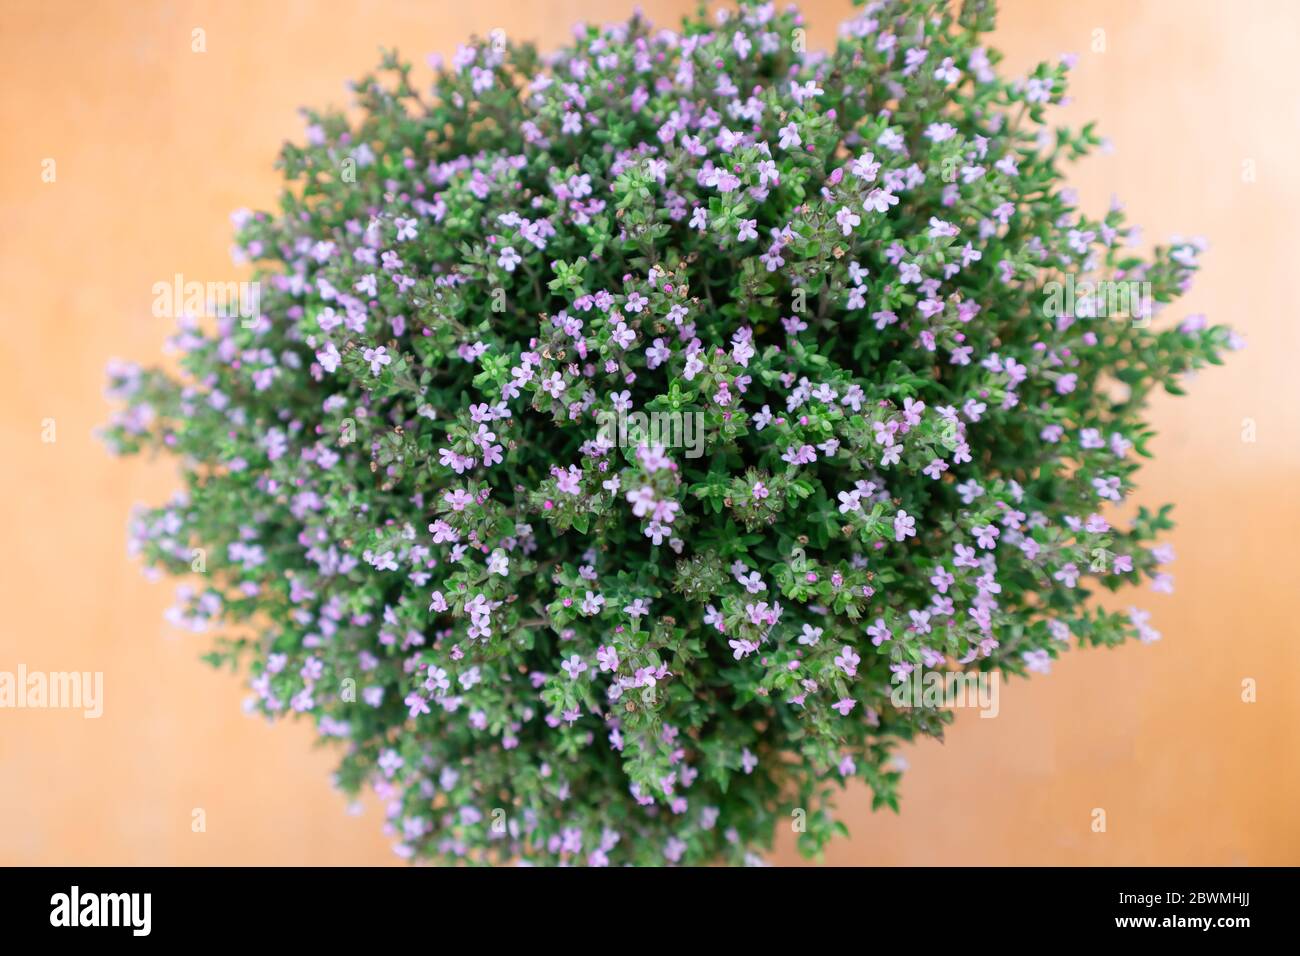 Close up, macro of thyme plant flowering, small purple flowers, aromatic plant for culinary and aromatherapy use, bright orange background. Alternativ Stock Photo